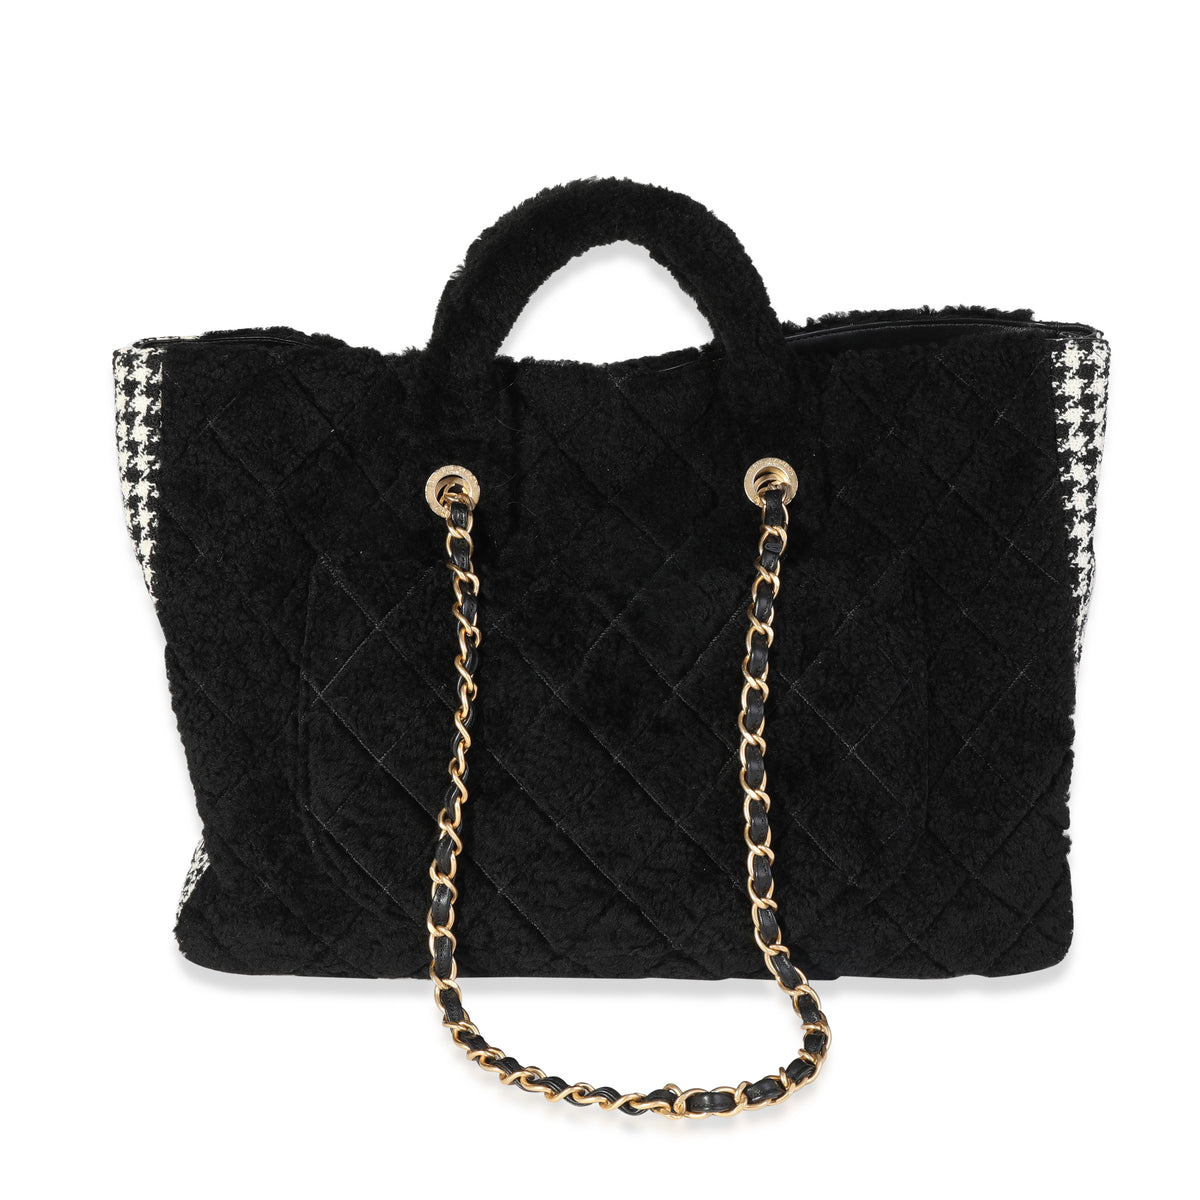 Chanel Black Shearling & Houndstooth Boucle Shopper Tote